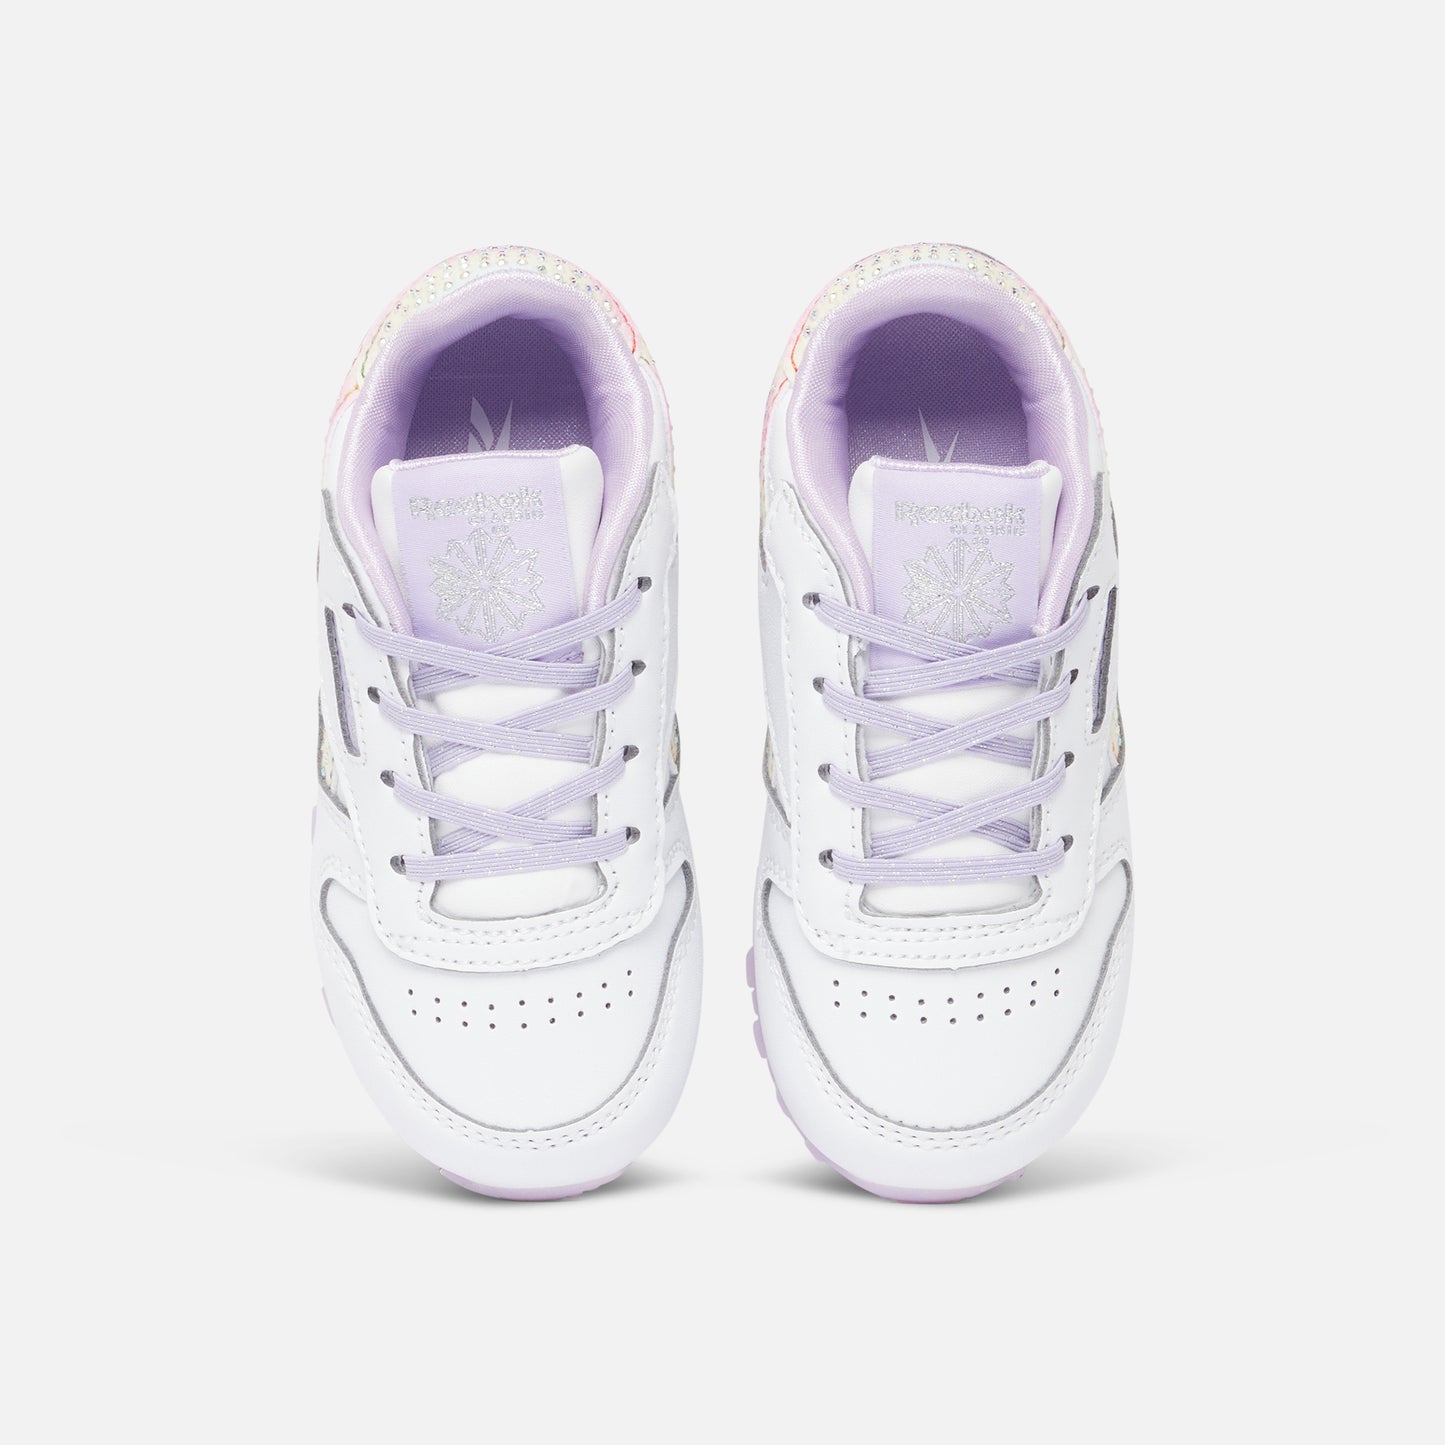 Classic Leather Step N Flash White/Purple Oasis/Silver Met.